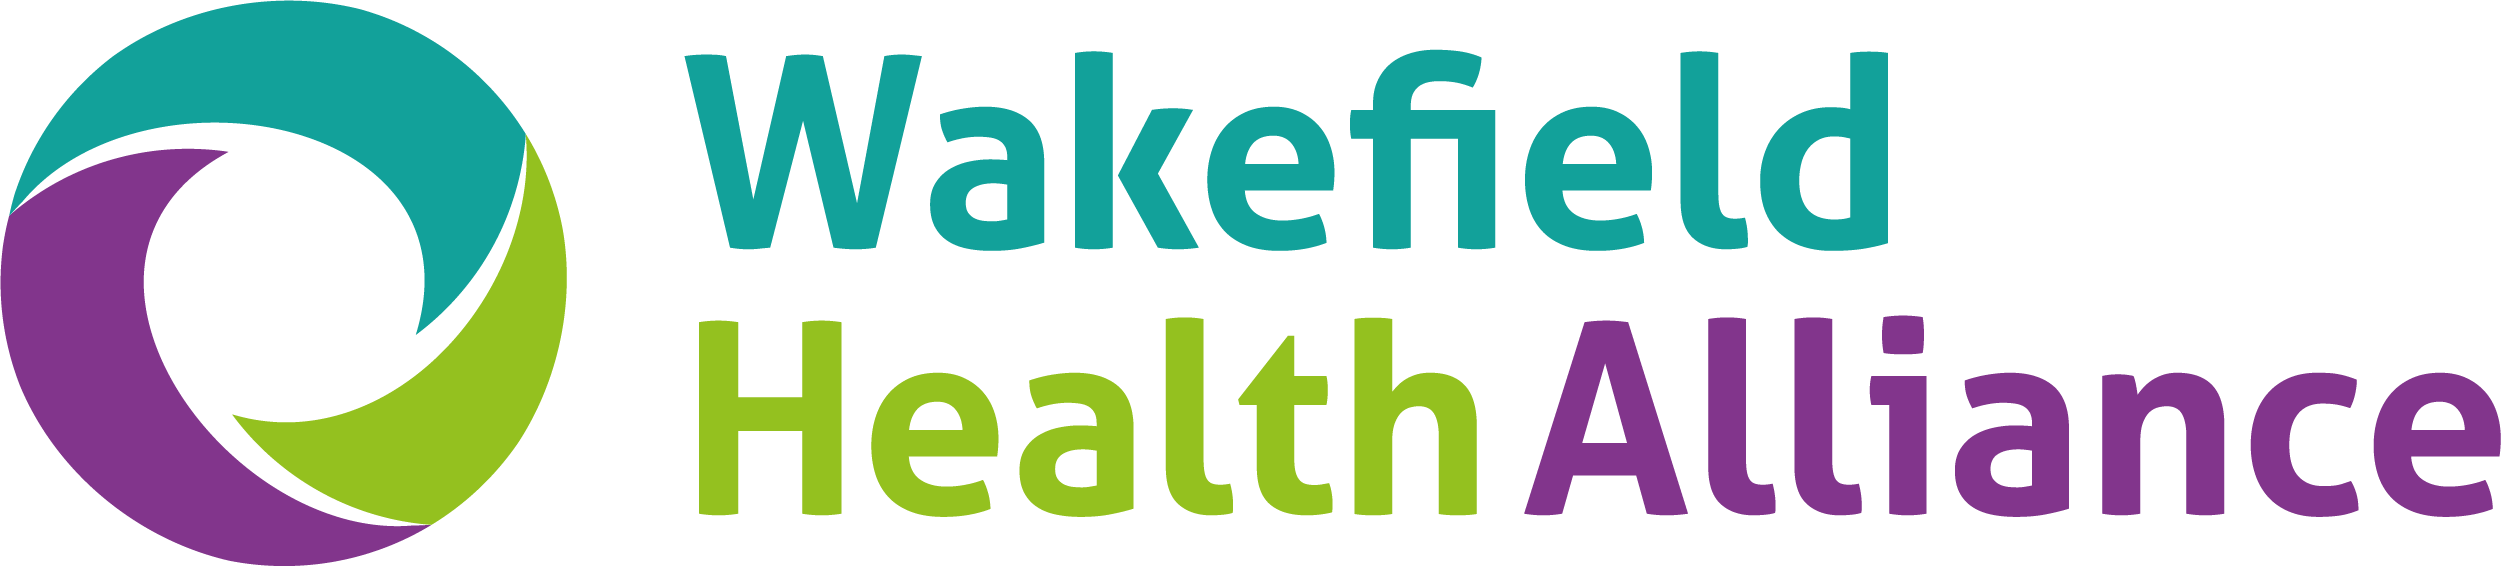 wakefield health alliance logo with link to the alliance website